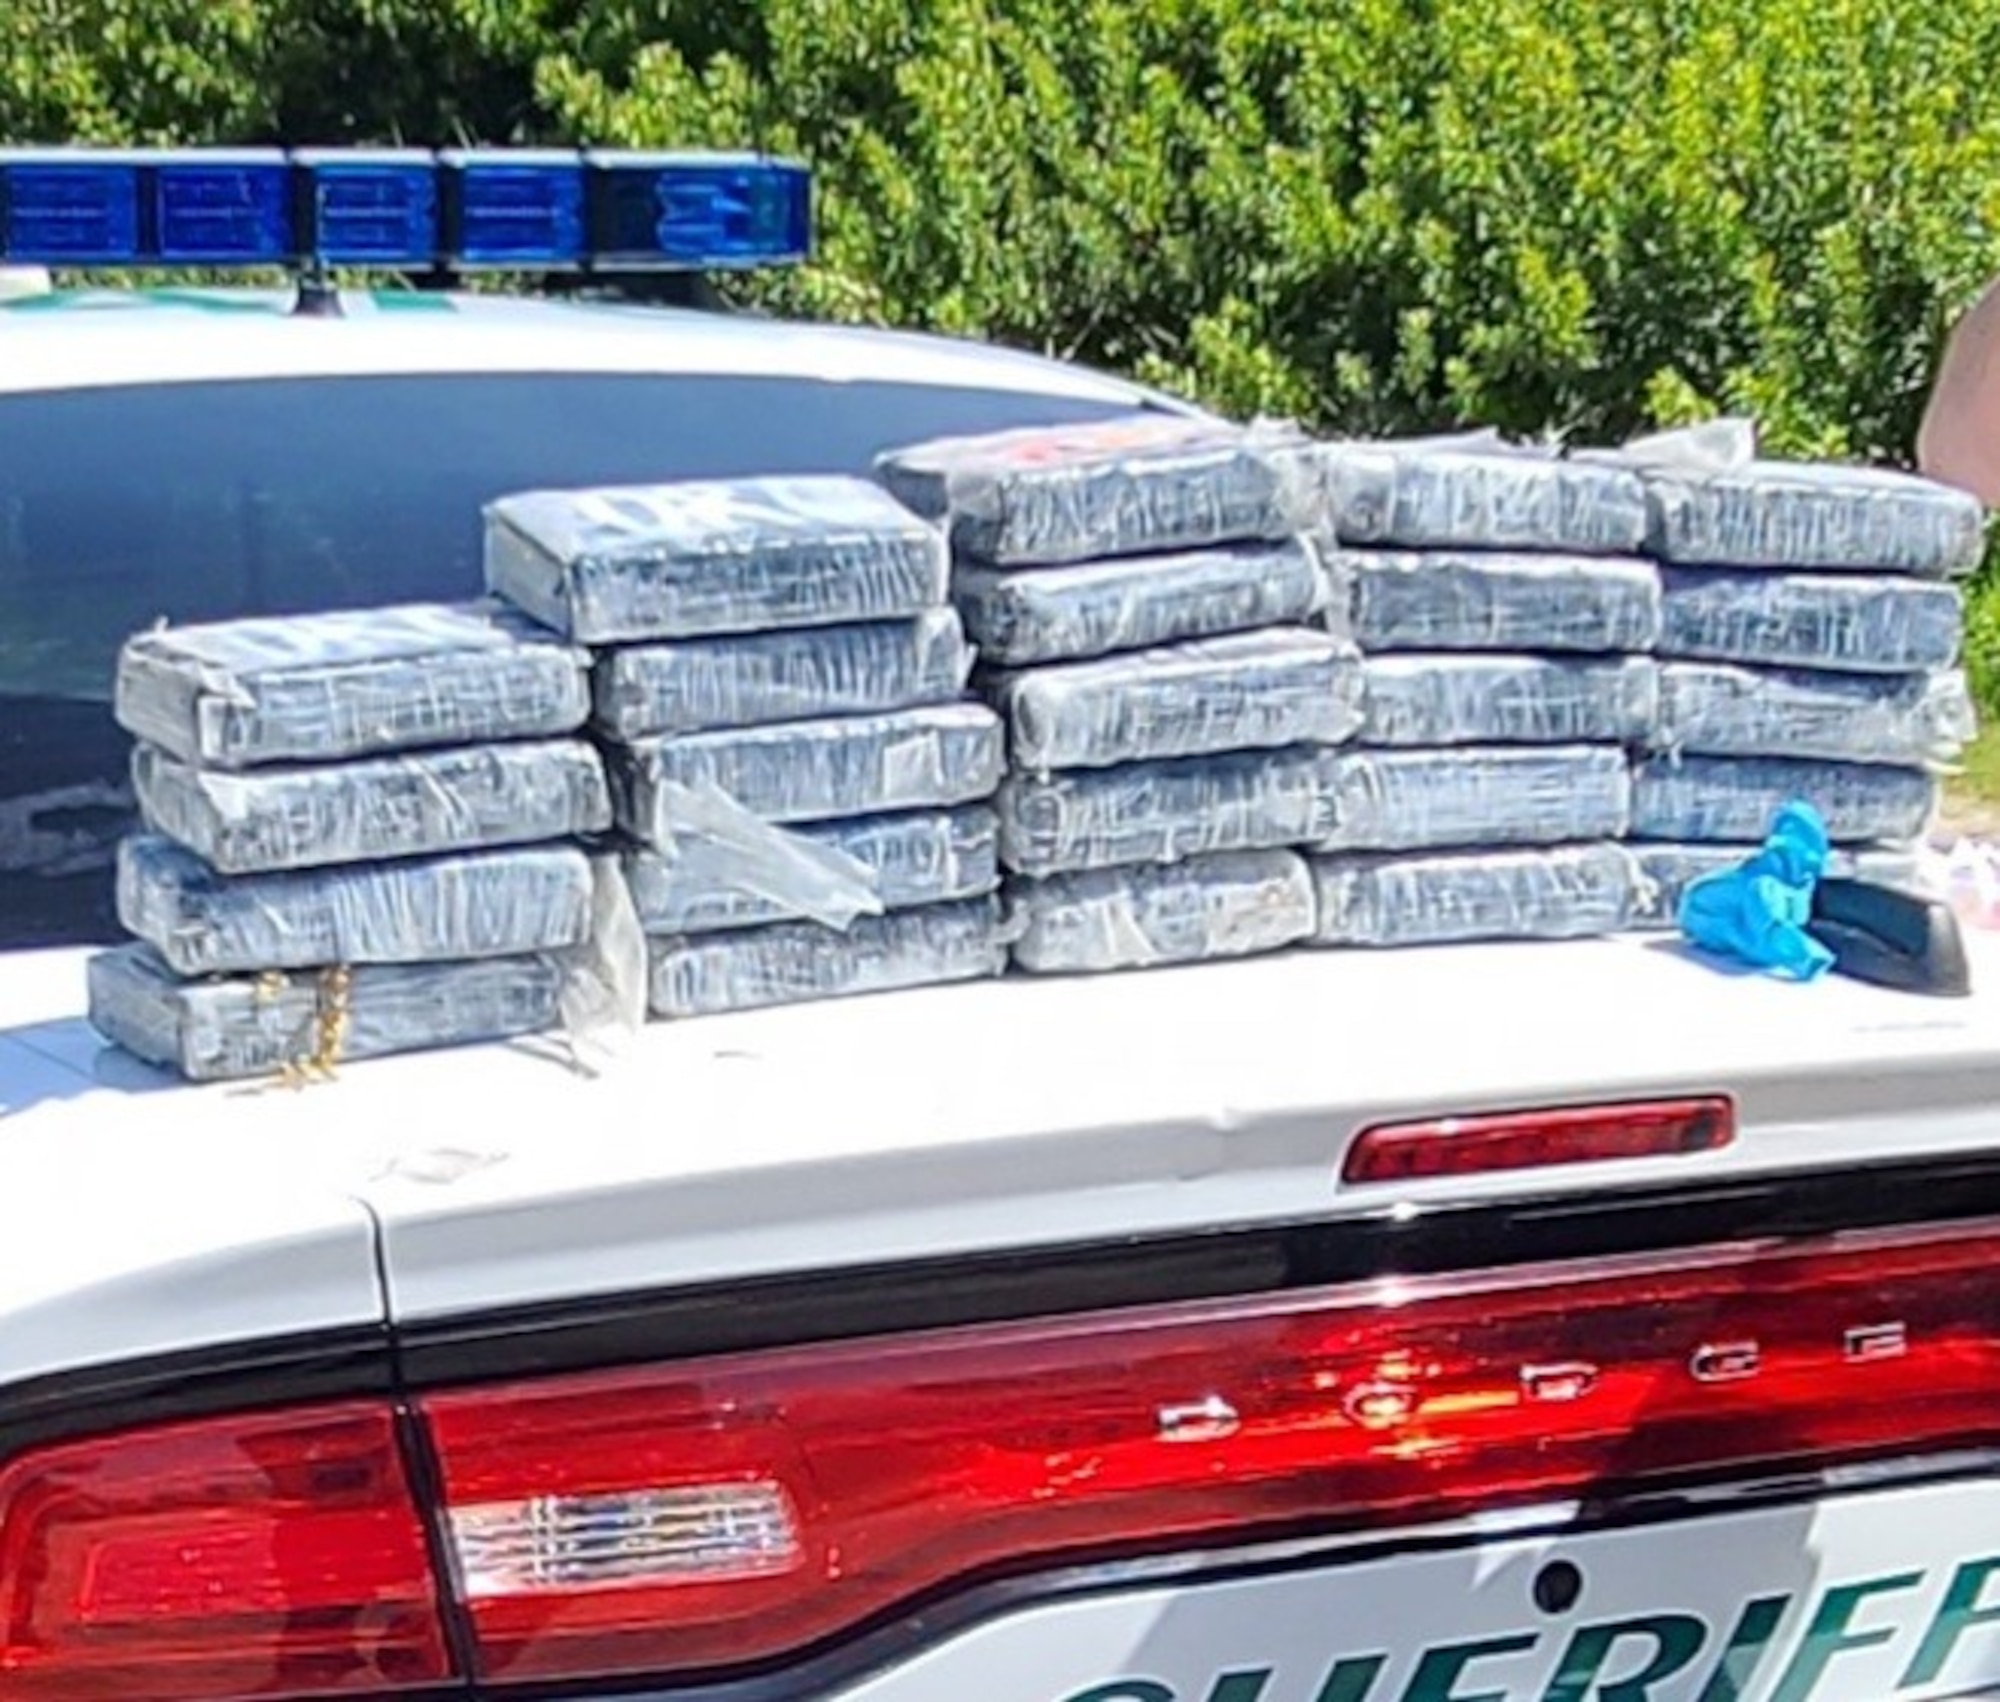 Defenders from the 45th Security Forces Squadron seize nearly 30 kilograms of cocaine that washed ashore on a Cape Canaveral Space Force Station, Florida, beach, May 19, 2021. According to the Brevard County Sheriff's Office, the drugs had an estimated value of approximately $1.2 million.